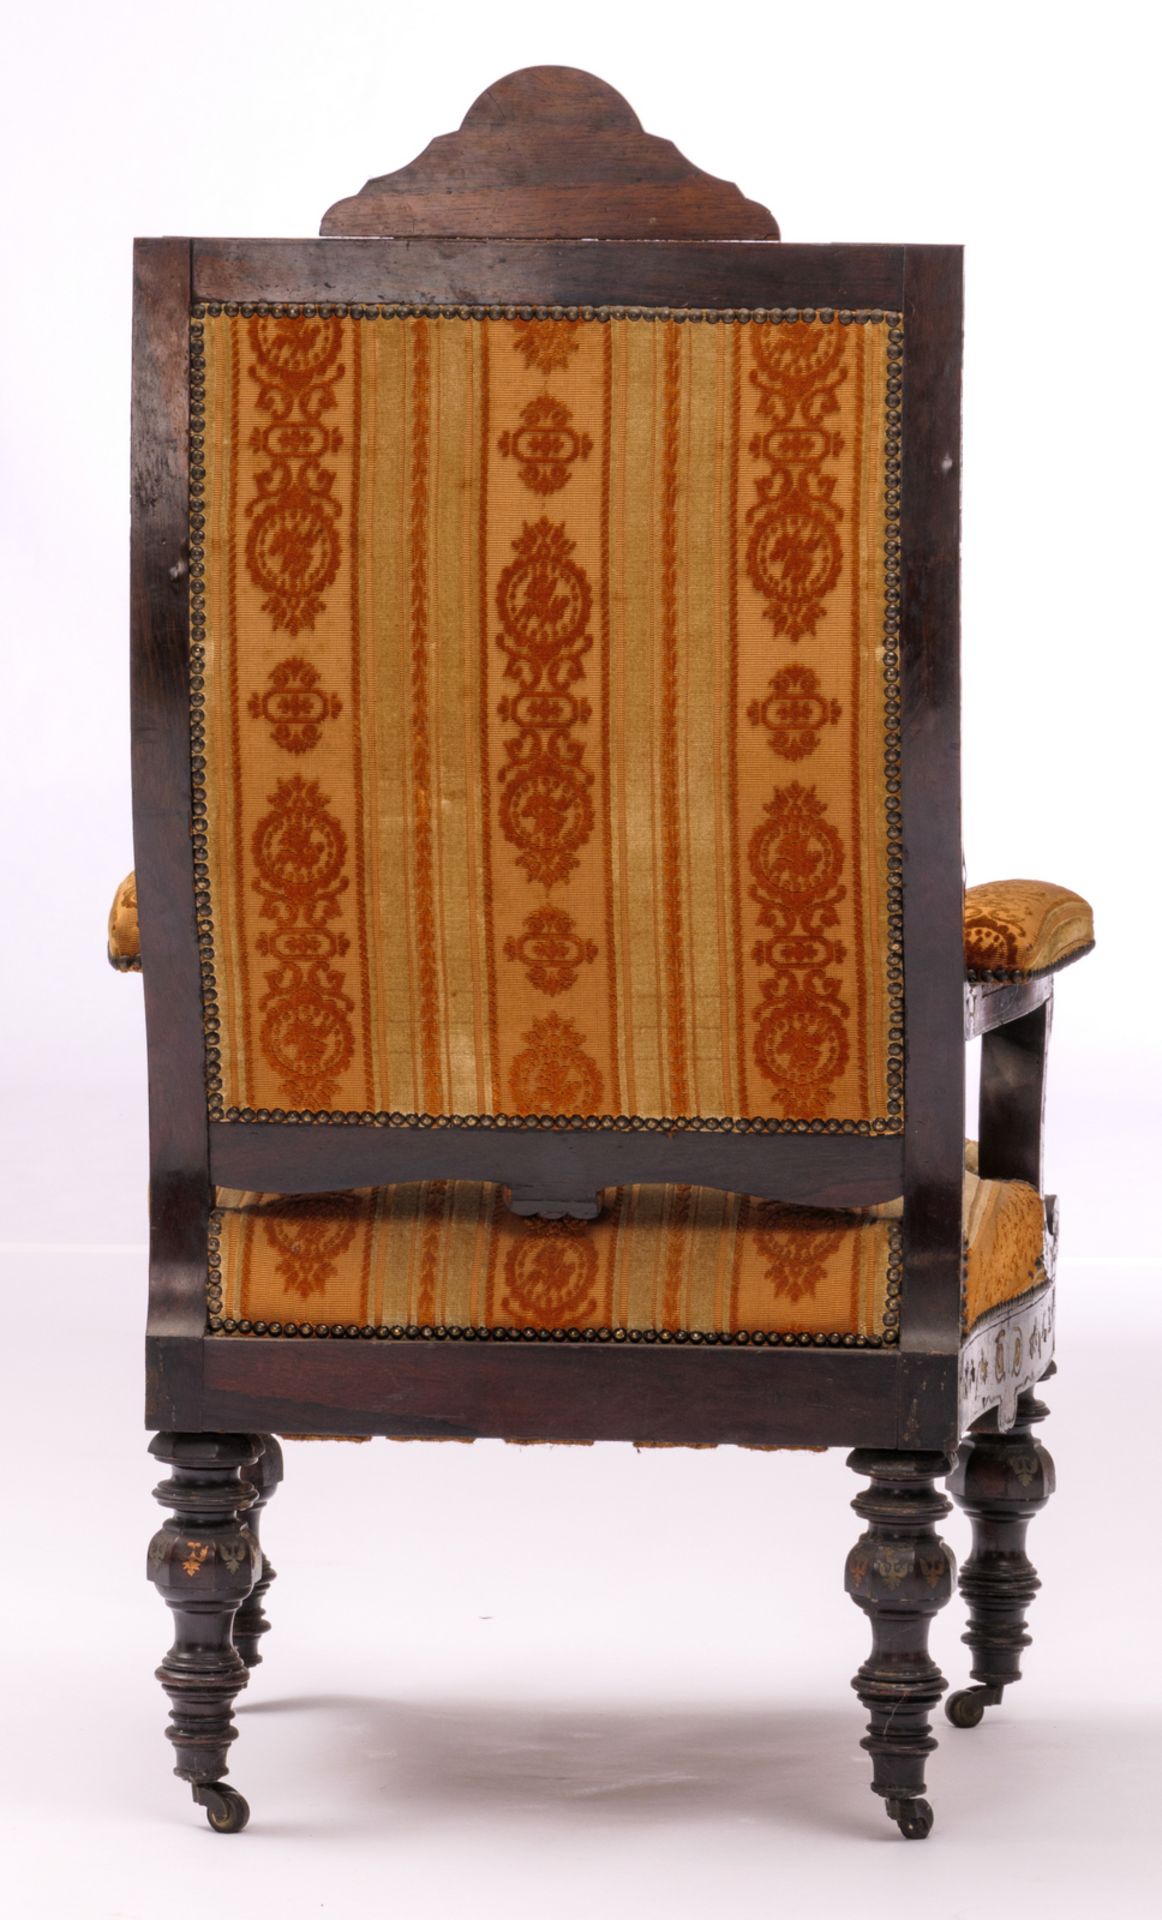 A rosewood and Boulle marquetry Baroque revival armchair, possibly Prussian, 19thC, H 123 - W 68 - D - Bild 4 aus 7